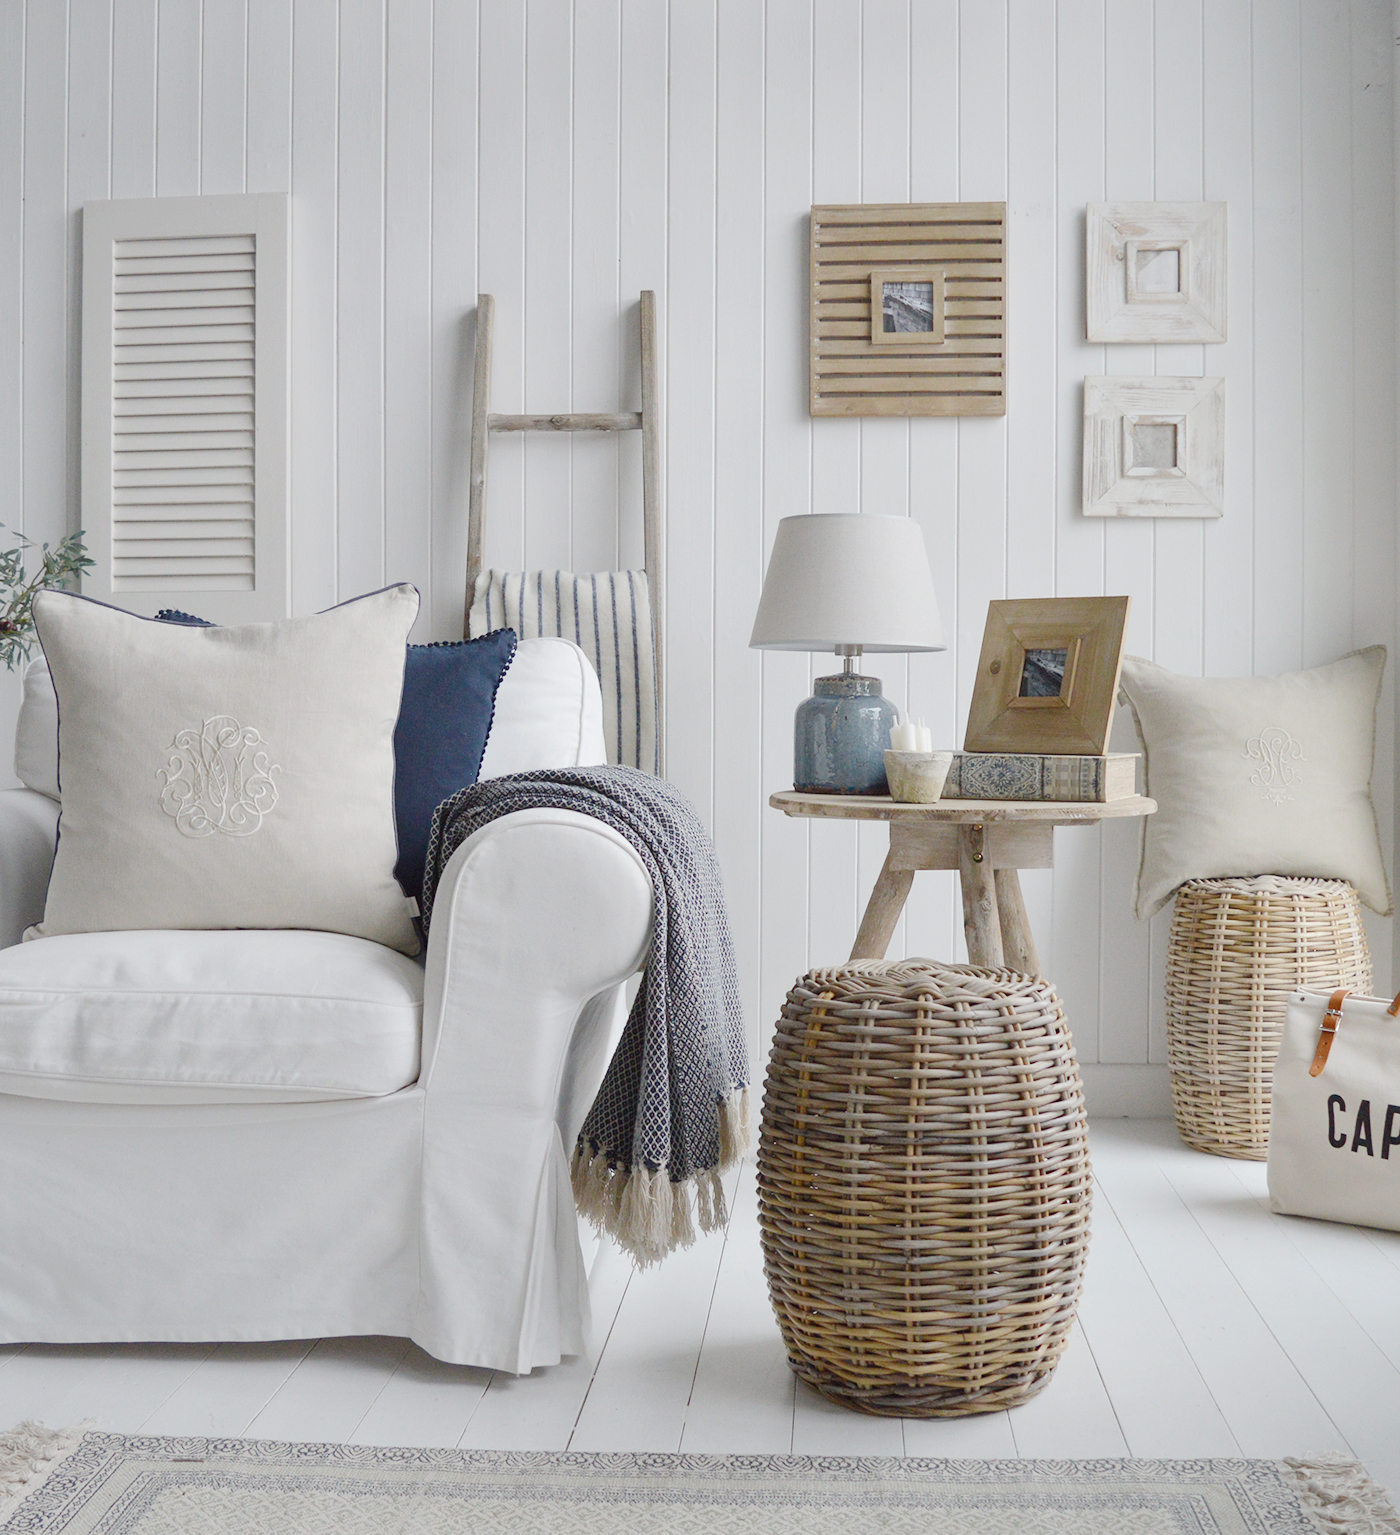 New England living room interior decor for modern coastal, country and coastal styled homes from The White Lighthouse UK